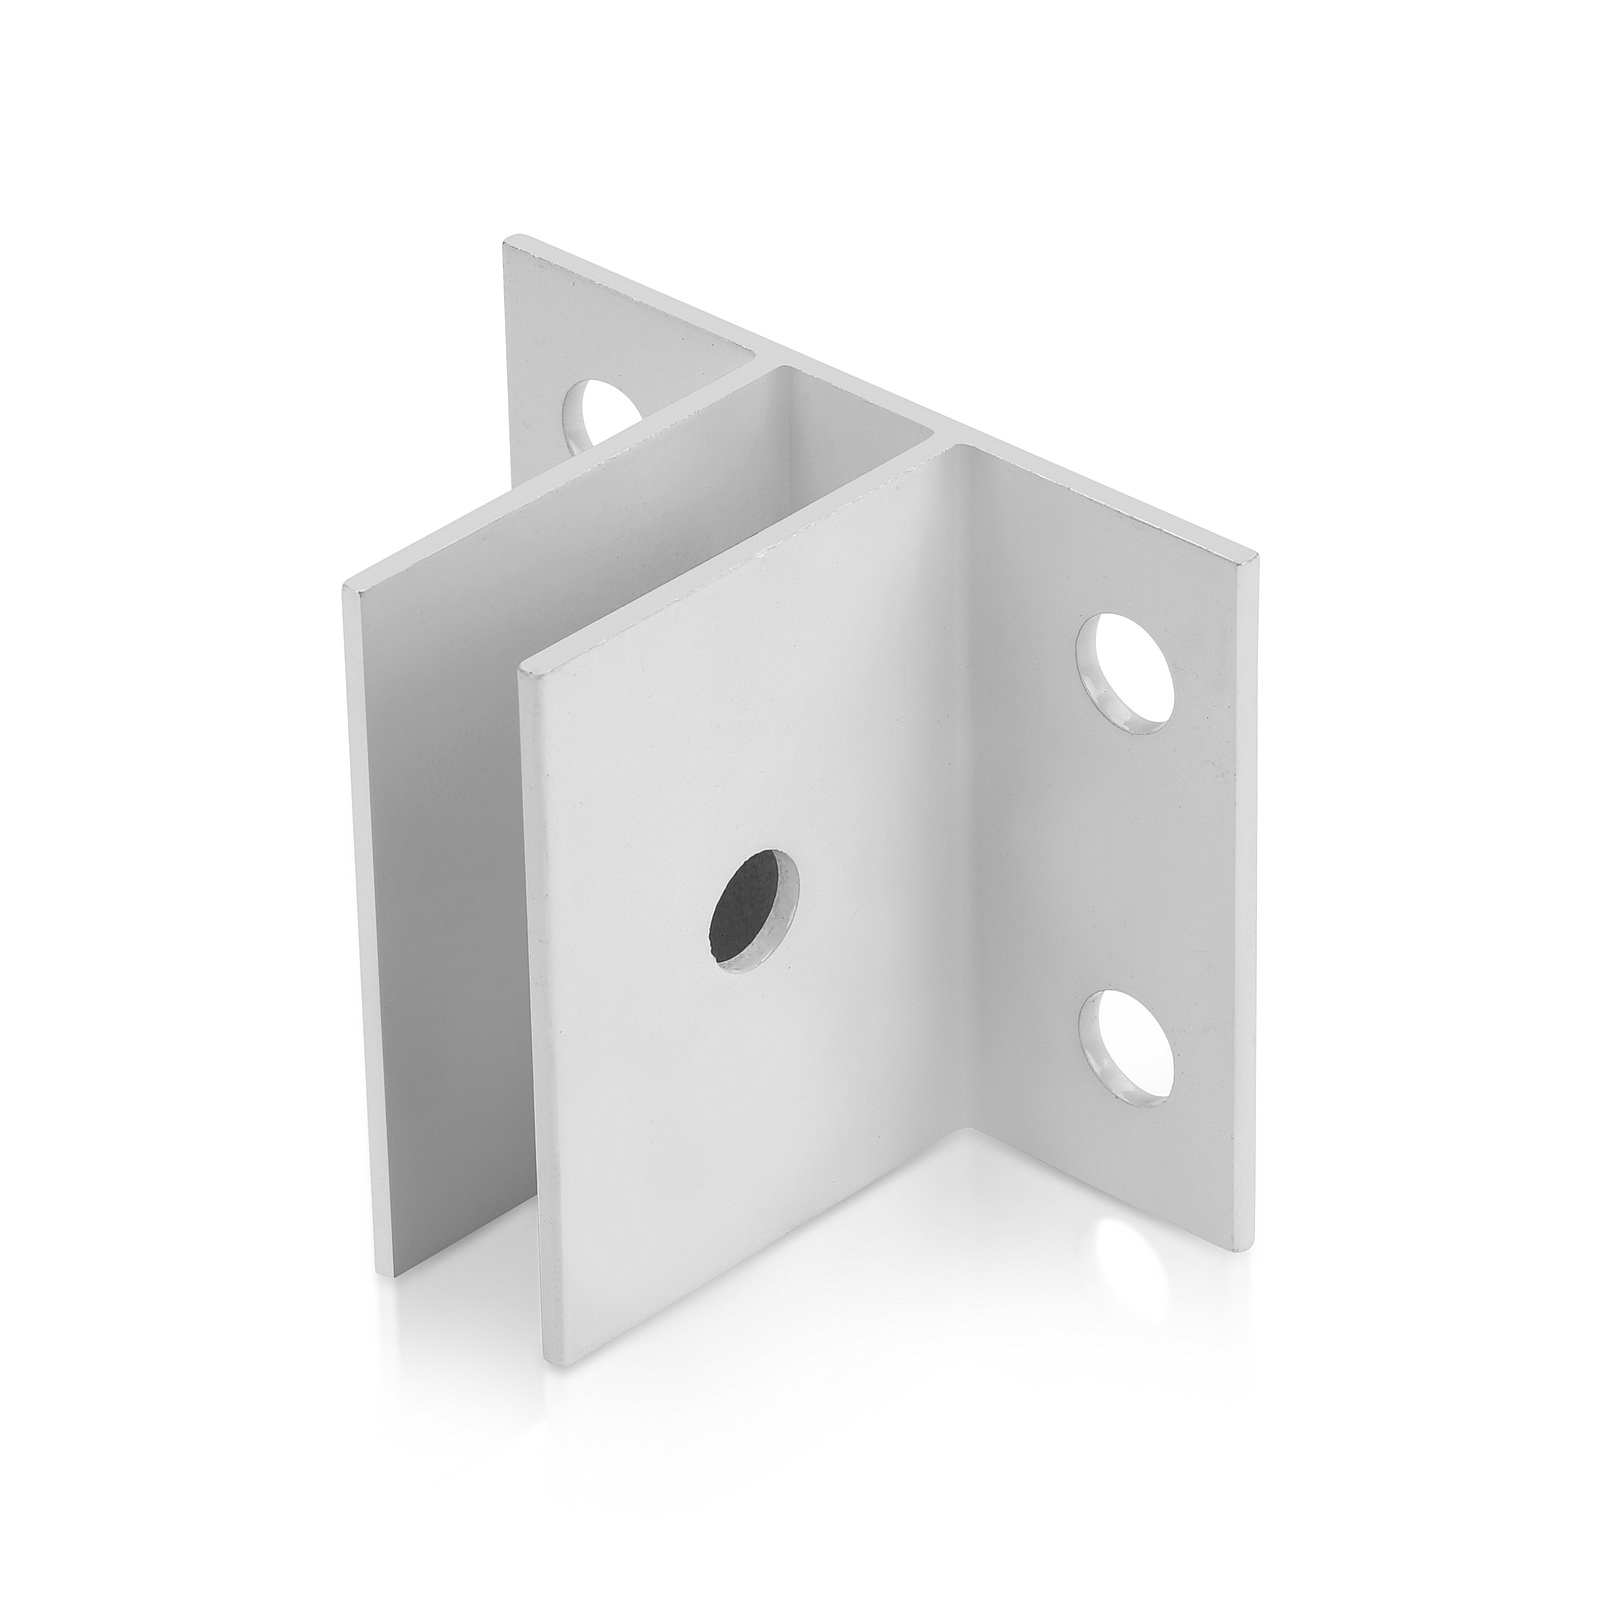 Sooper Center Bracket for Solid Sign Substrate Mounting - for 1/2'' Material - White Powder Coated Aluminum (1 ea.)